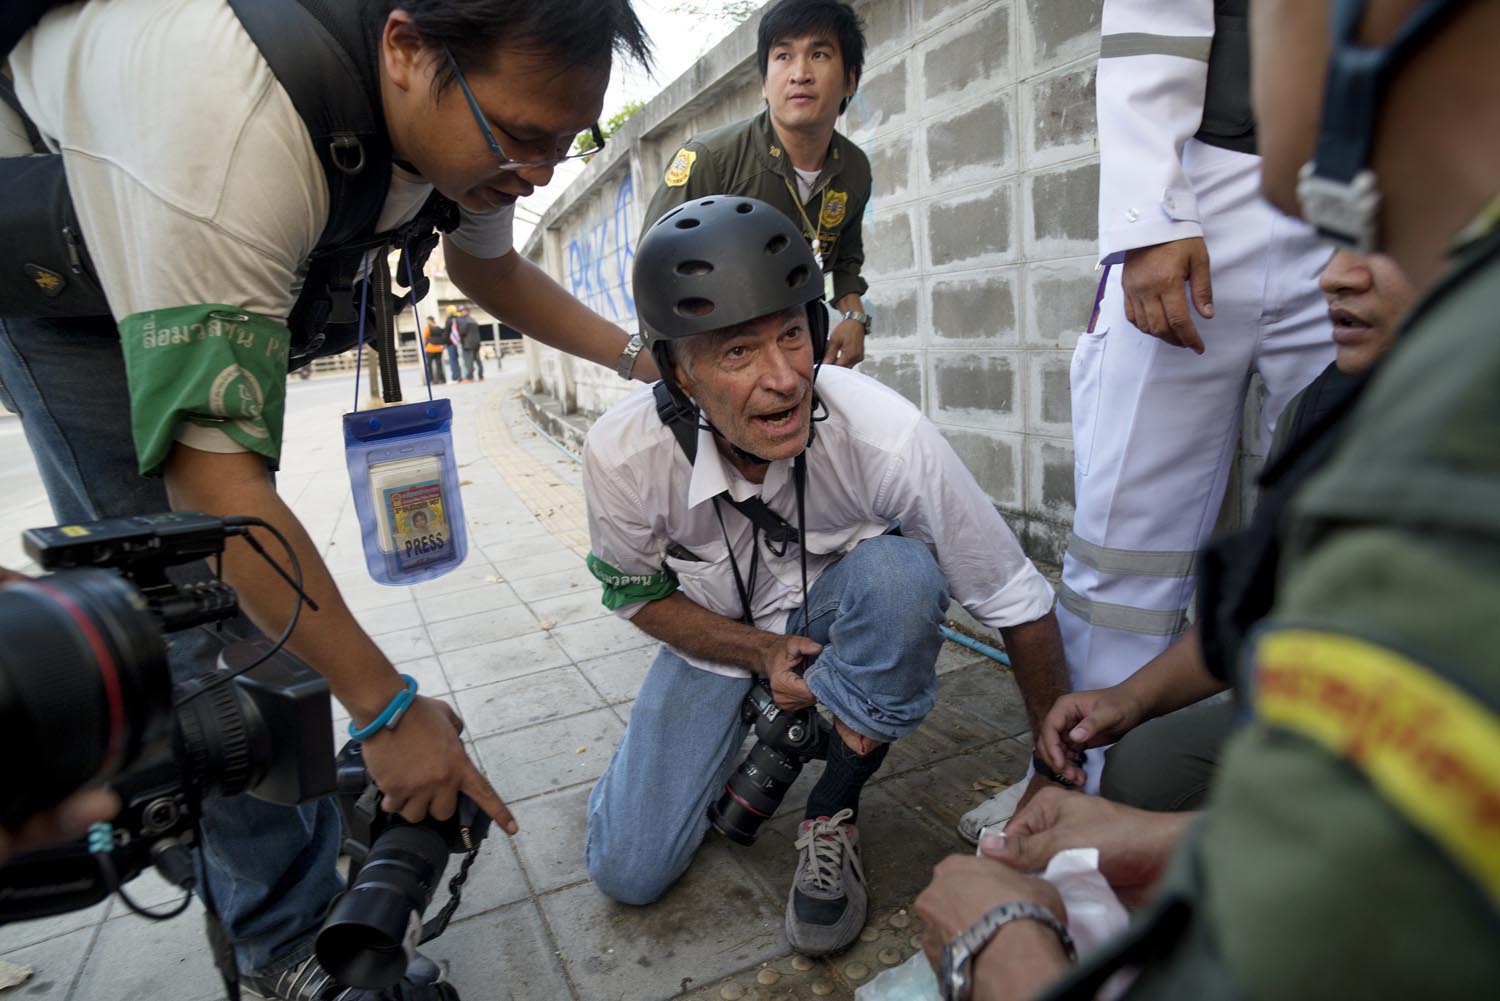 James Nachtwey, legendary photojournalist, shot and wounded in Thailand